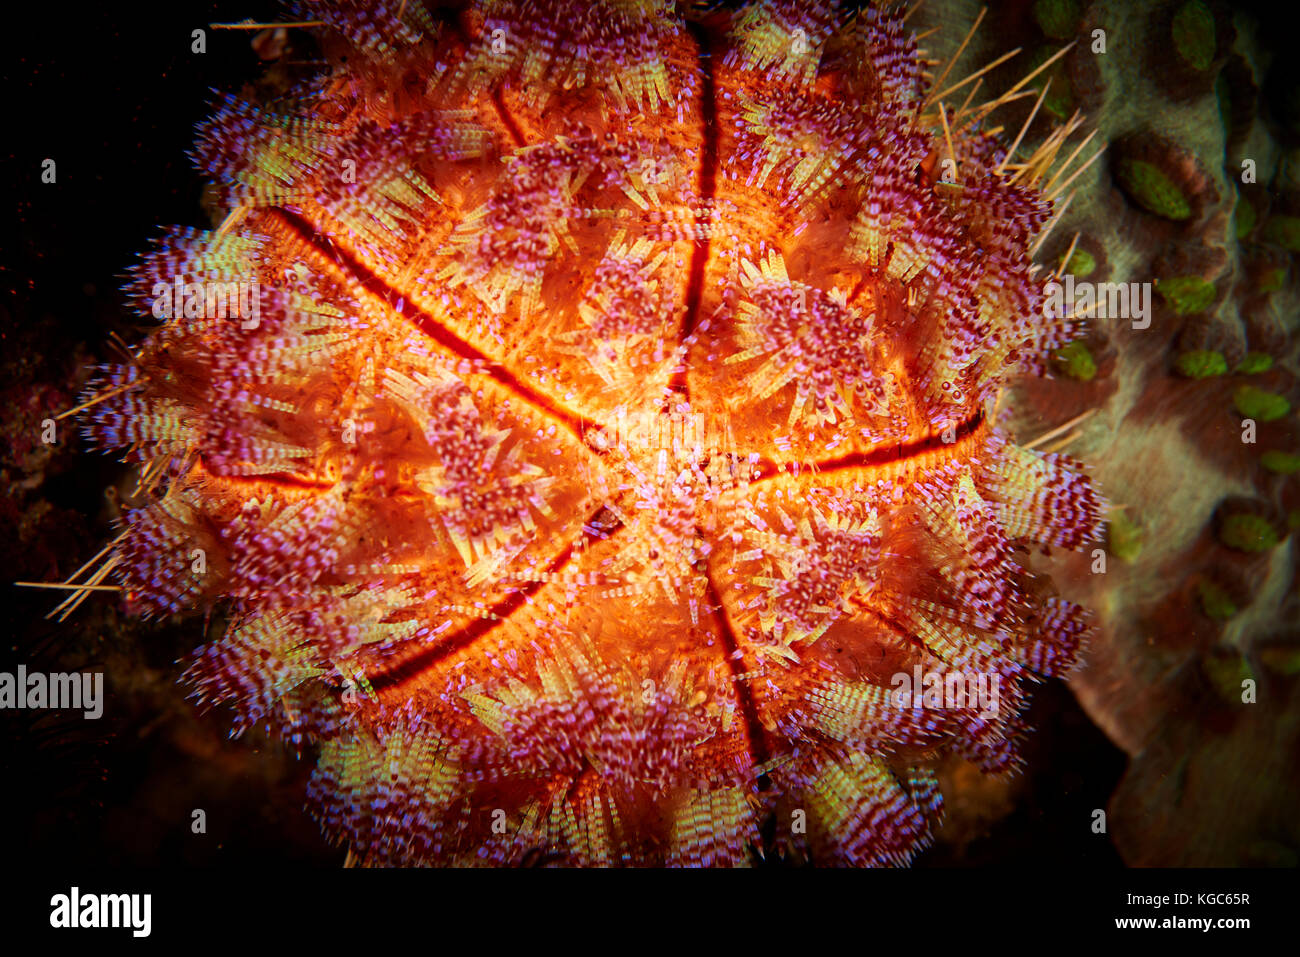 A Fire urchin in all its vibrant resplendency feeding at night in Komodo National Park, Indonesia Stock Photo